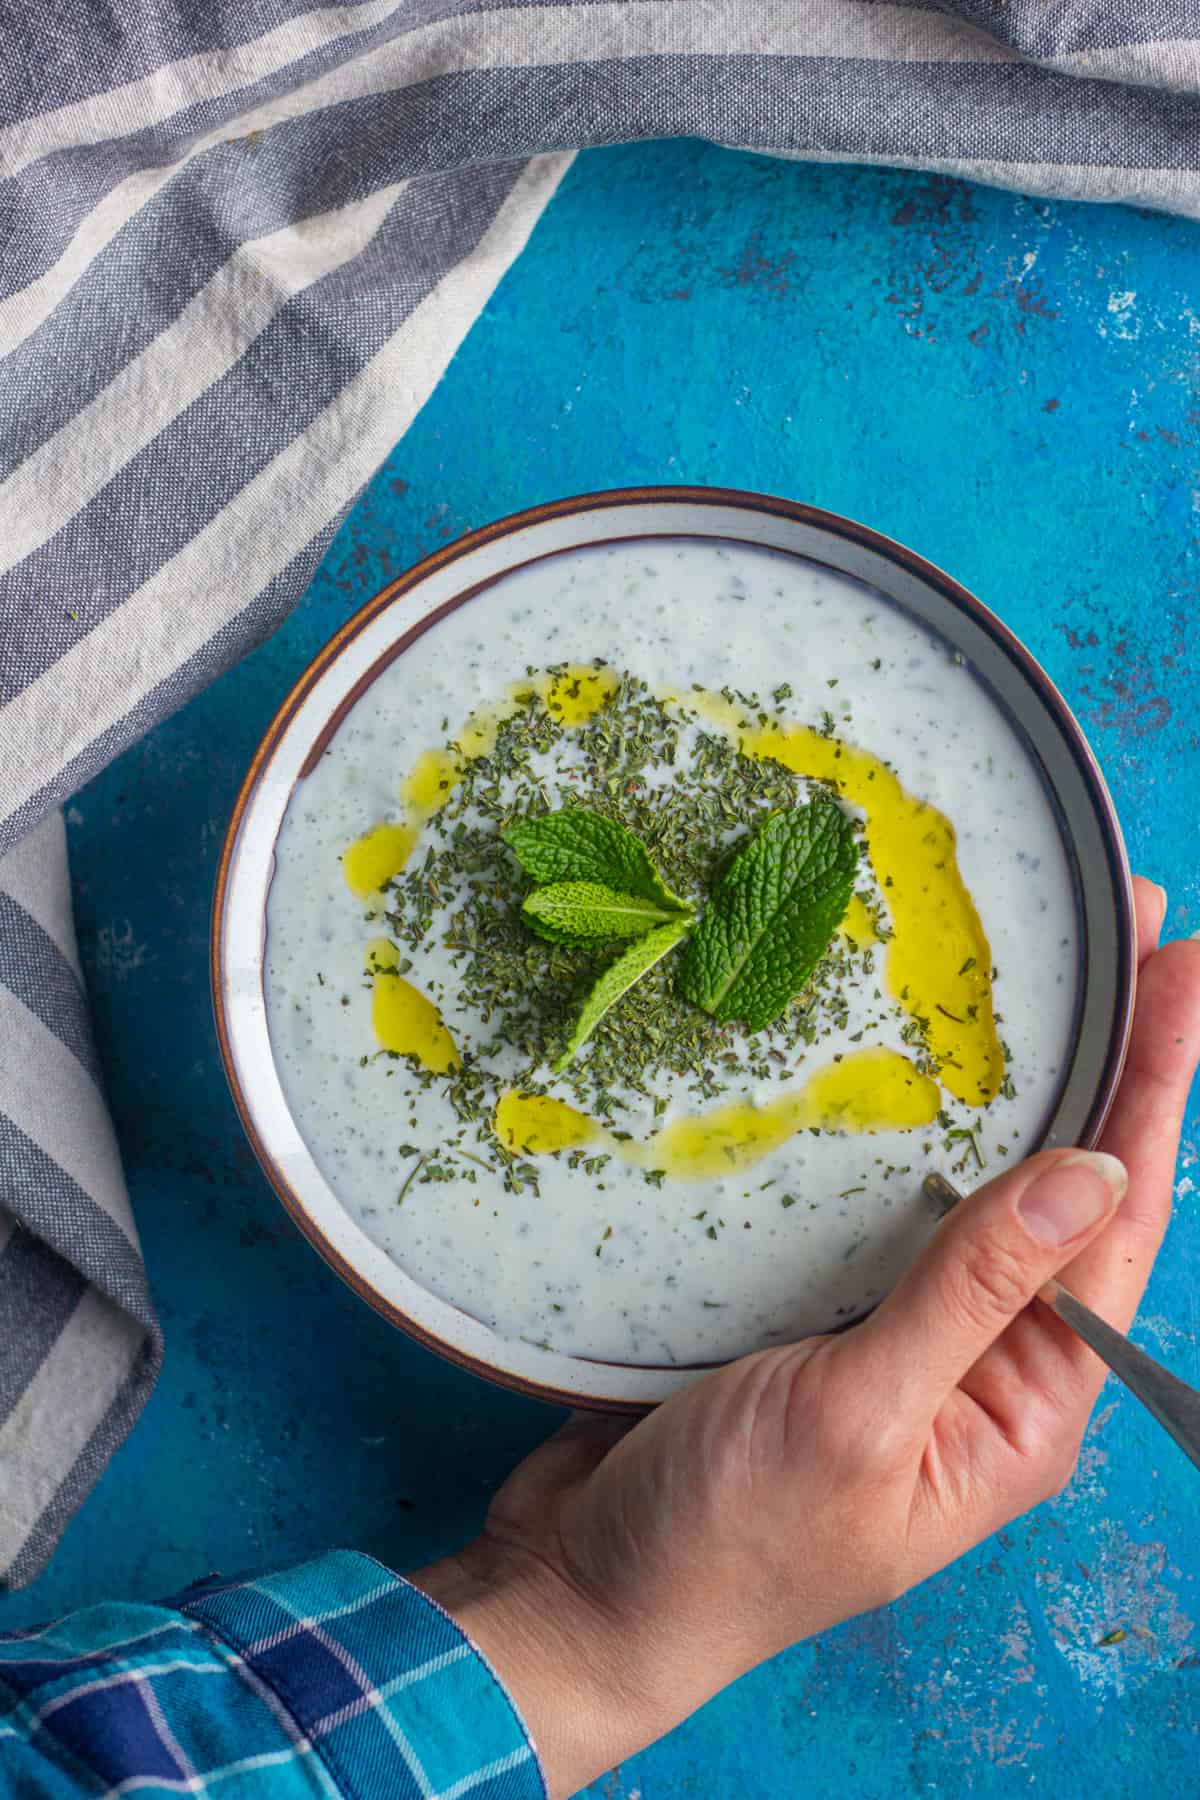 A hand holding a bowl of Turkish appetizer made with yogurt and cucumber